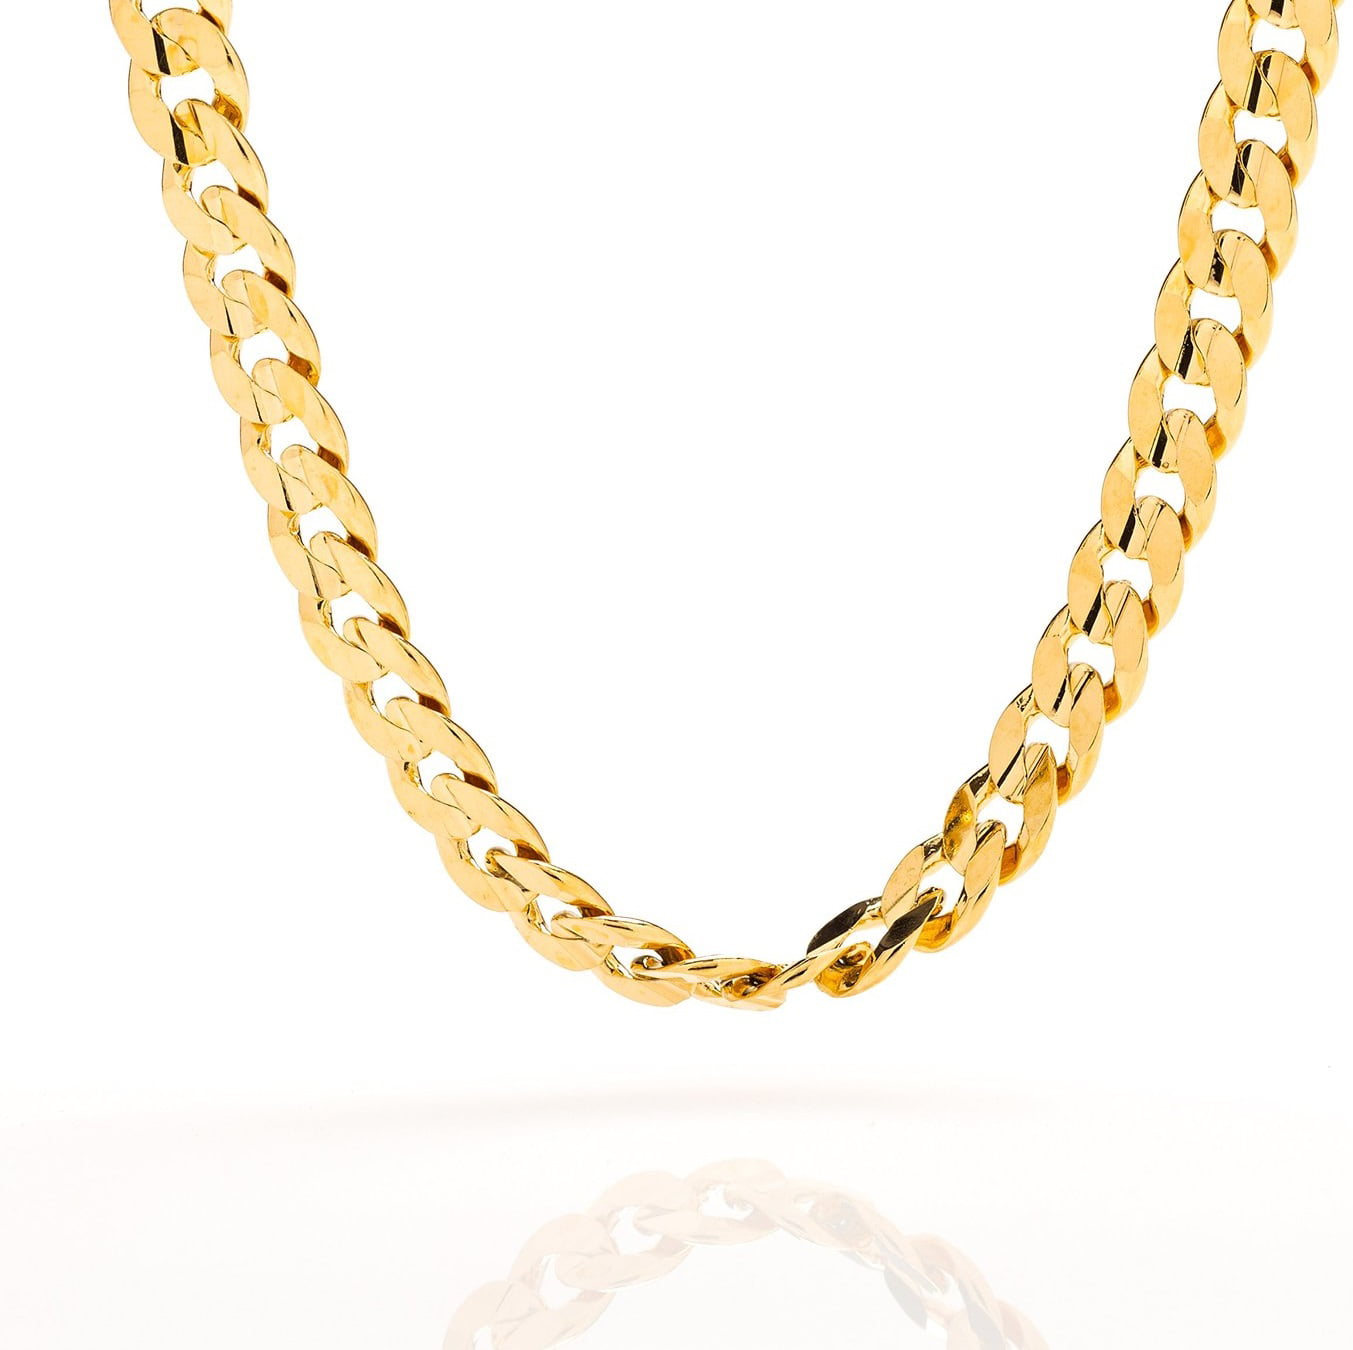 Cuban Link Chain - 6MM, 24K Gold Plated Necklace, Diamond Cut Hip Hop,  Tarnish-Resistant, Looks and Feels Solid, Comes in a Box-22